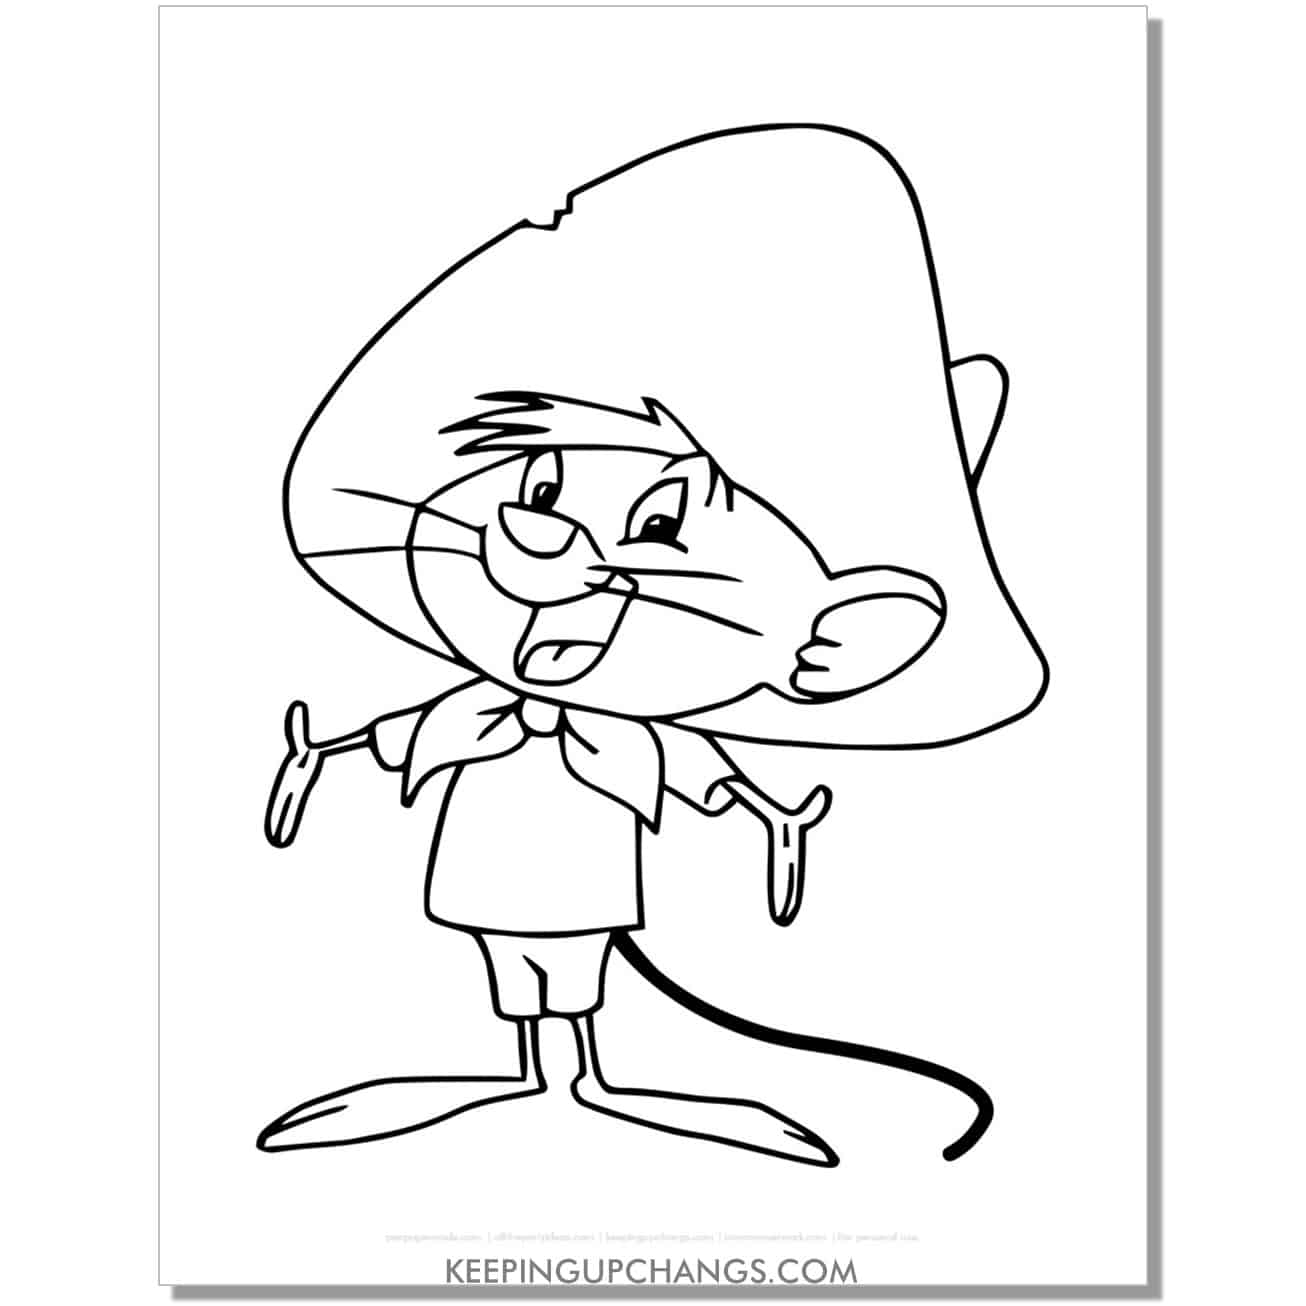 free speedy gonzalez looney tunes coloring page, sheet.